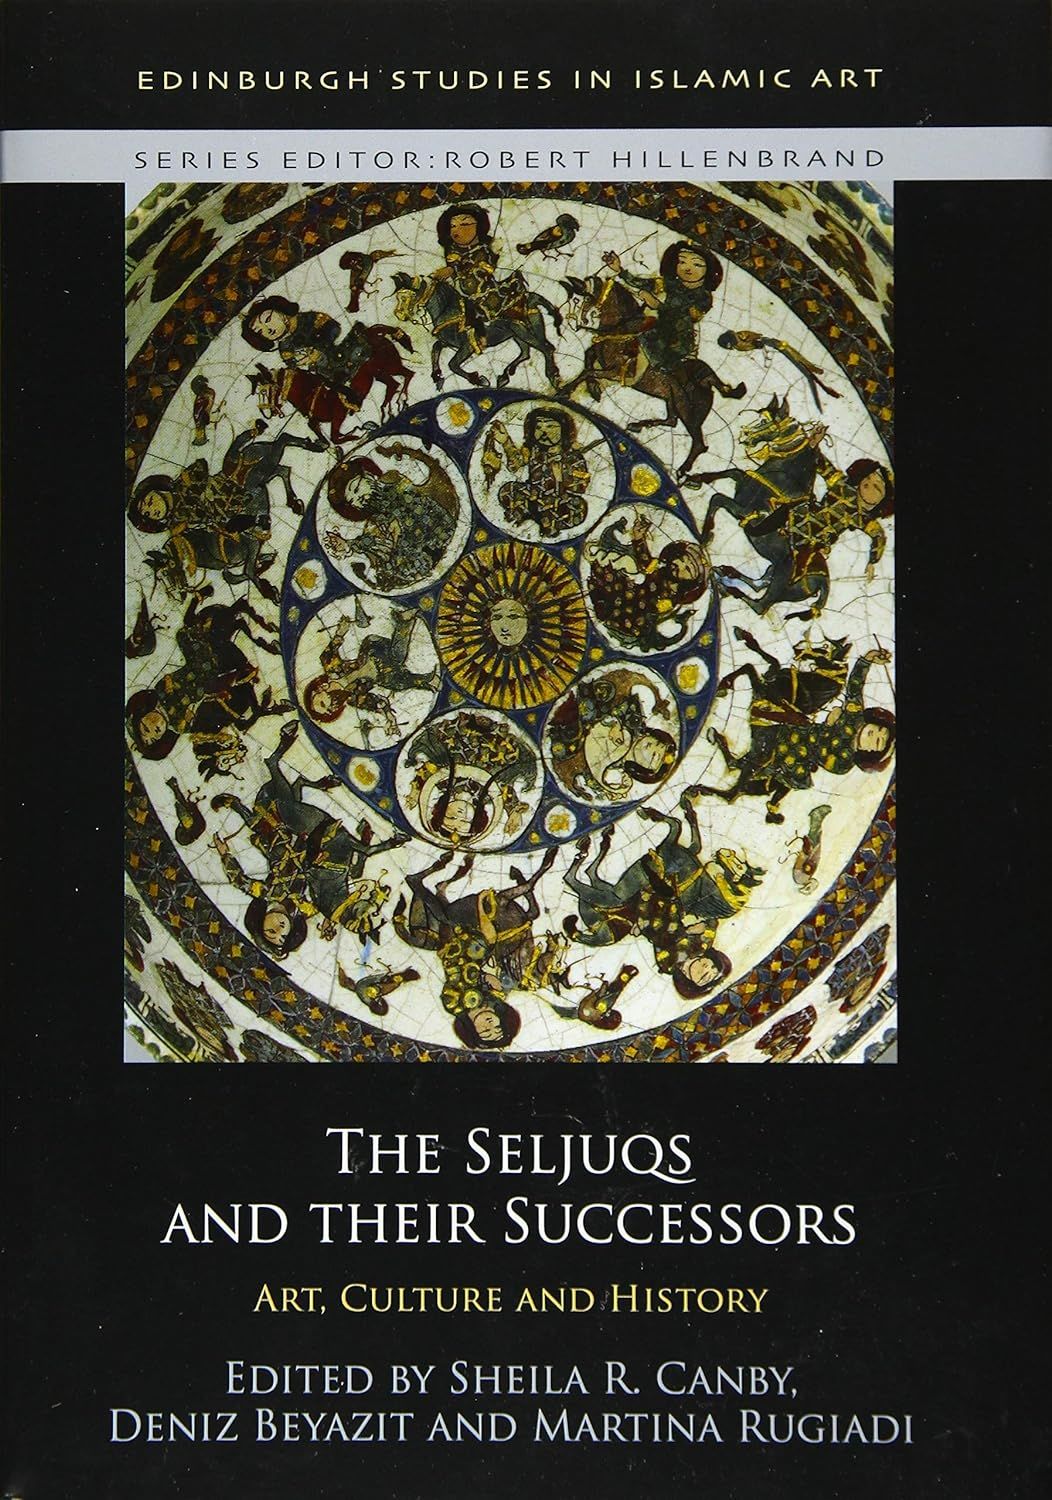 Seljuqs and Their Successors: Art, Culture and History